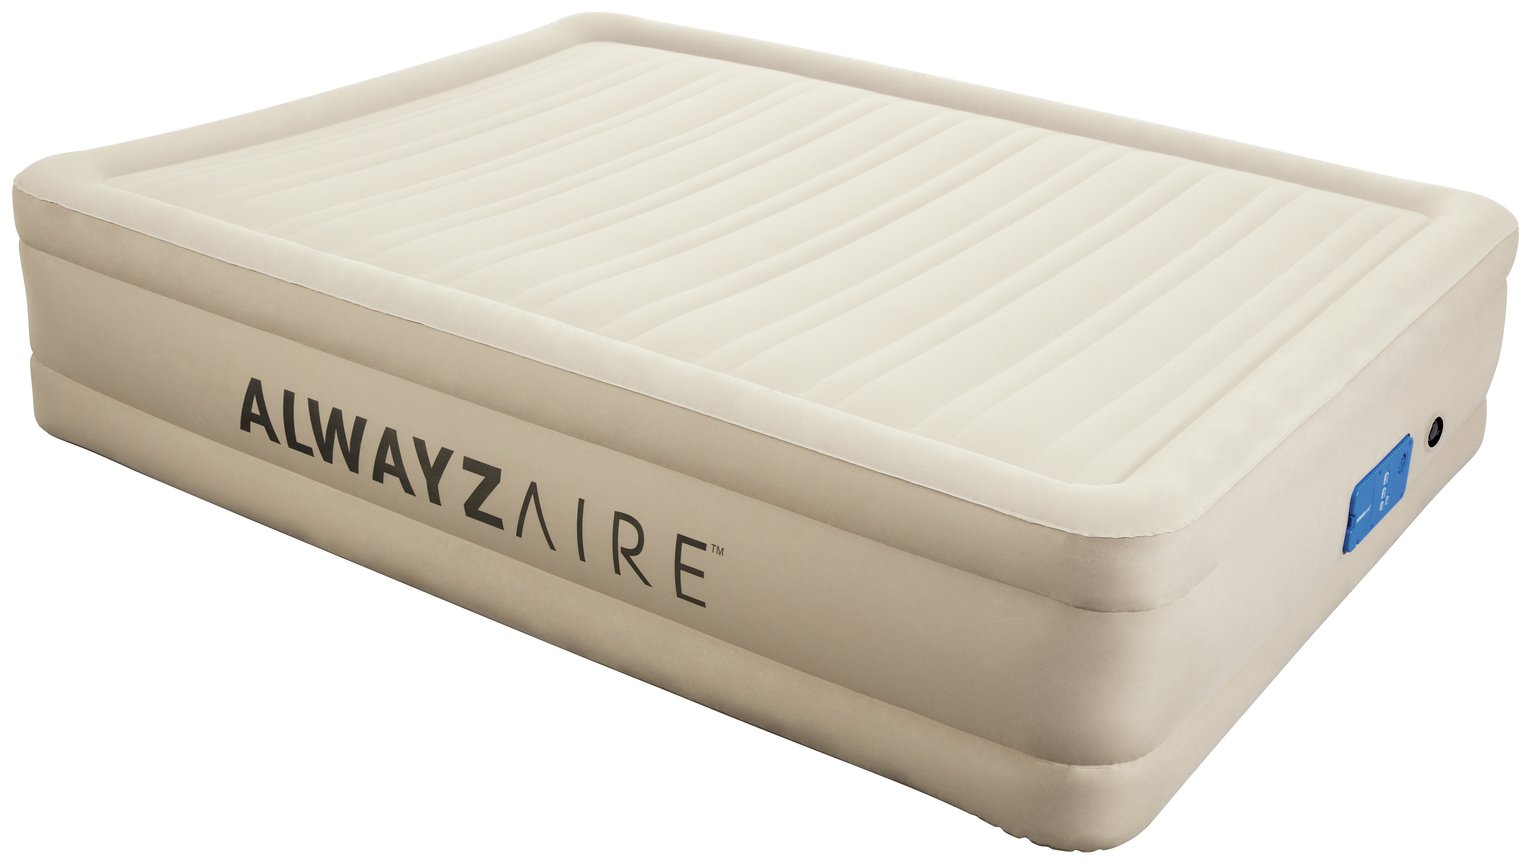 Bestway Alwayzaire Foretech King Size Air Bed